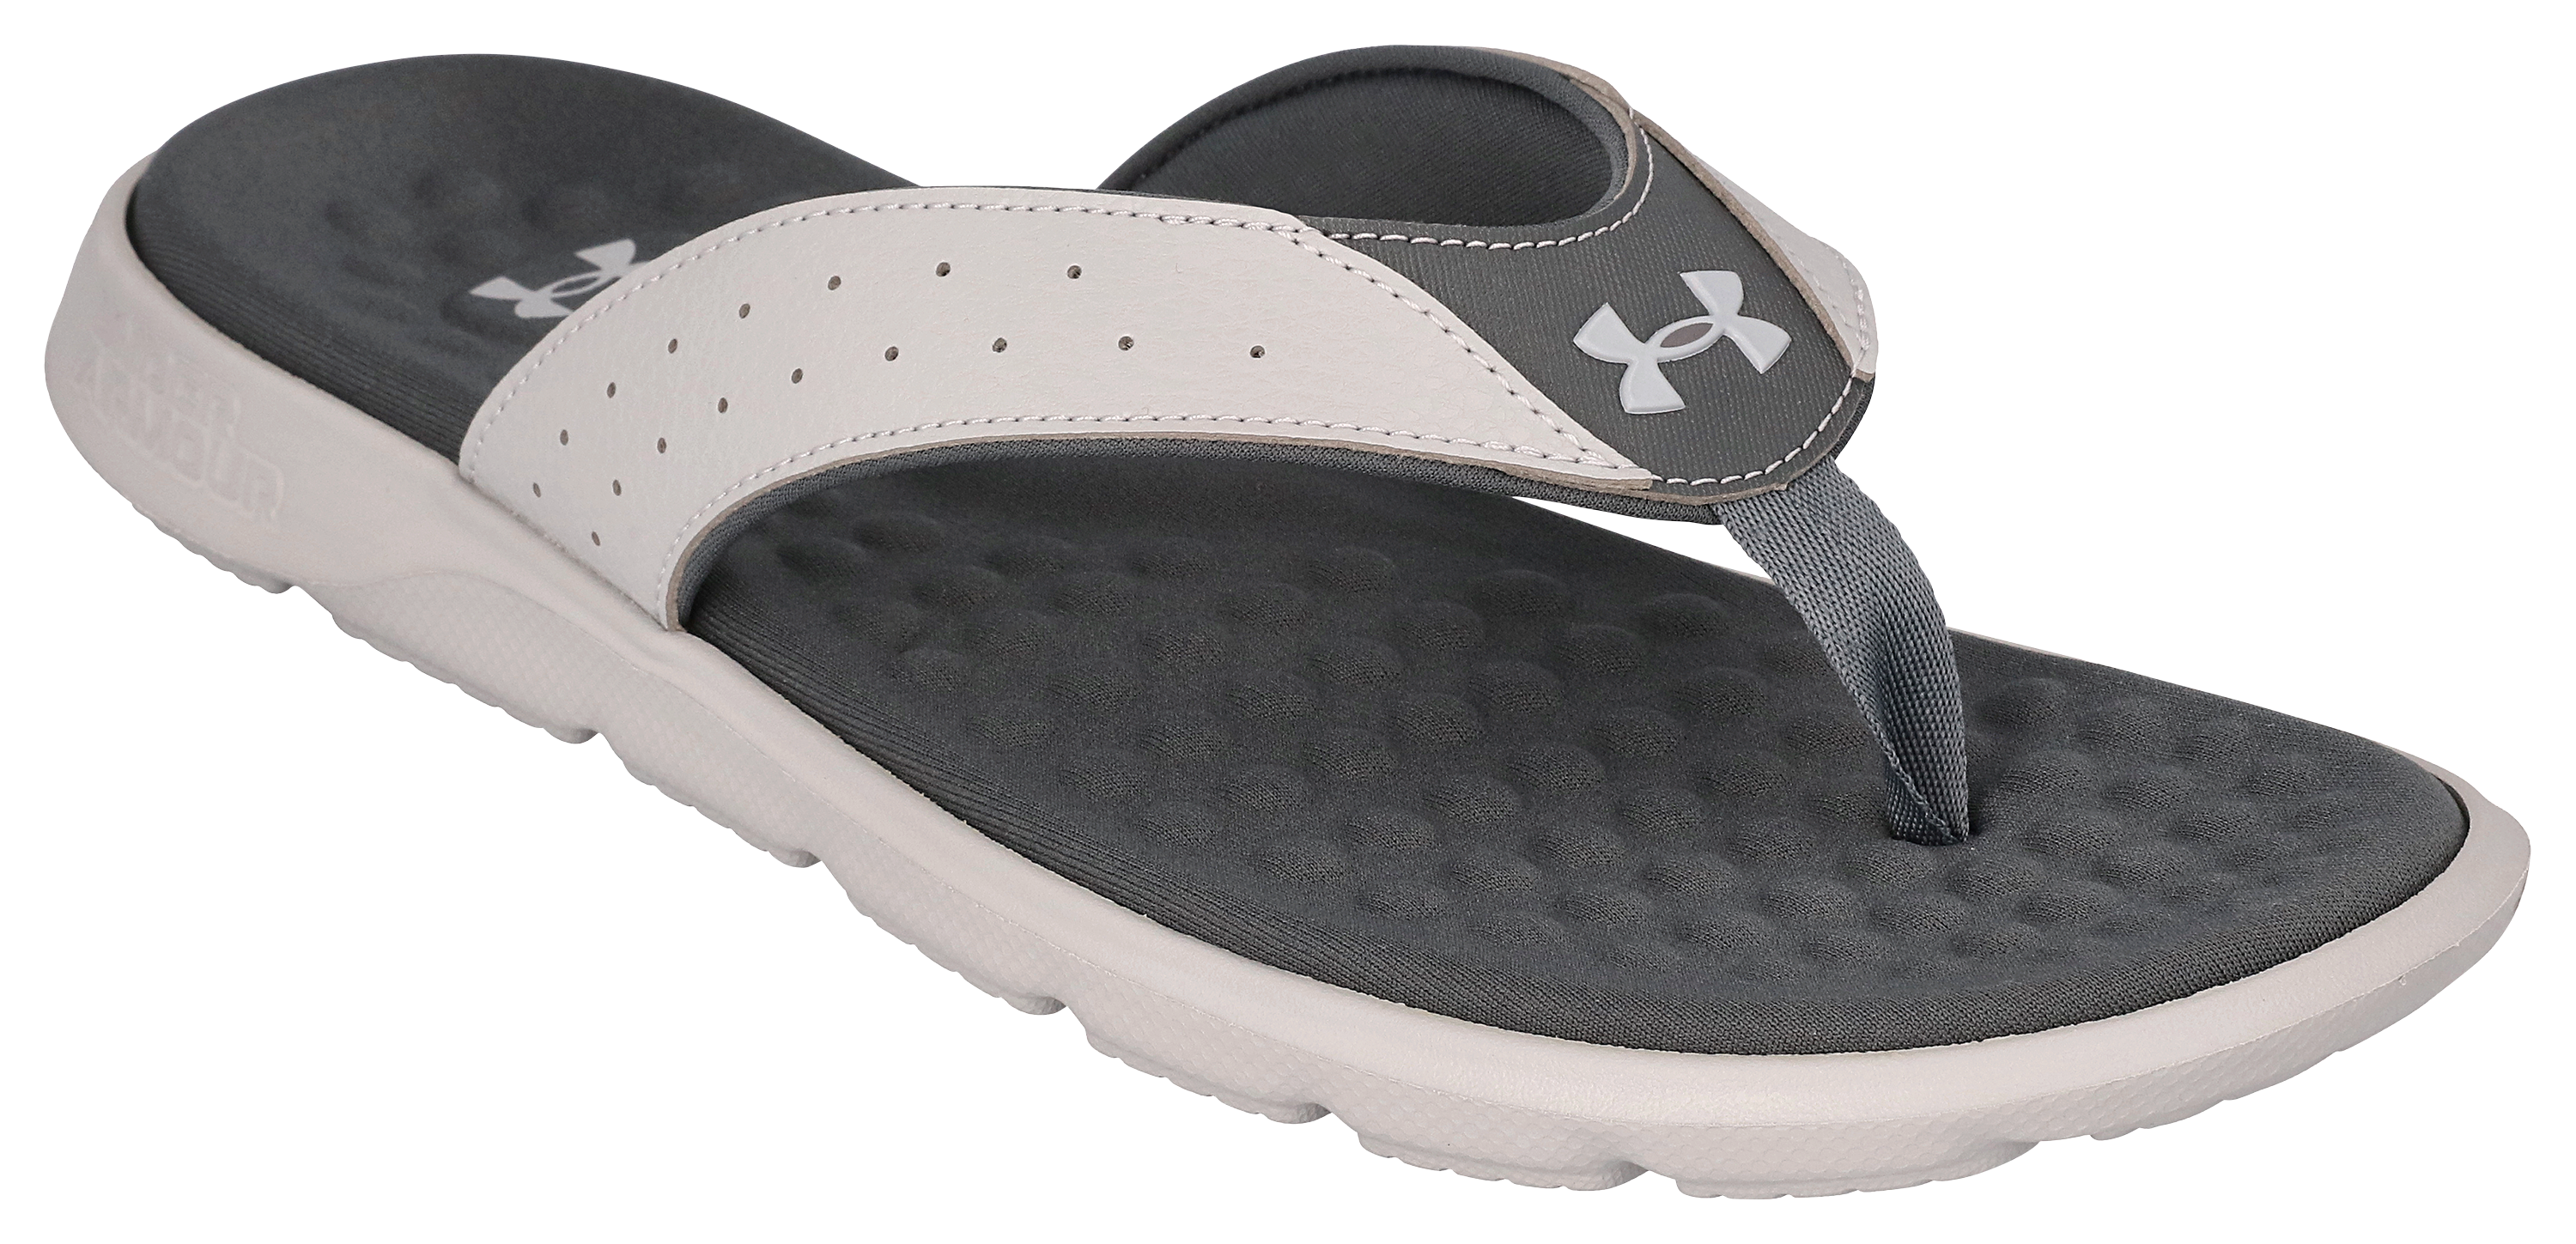 Under Armour Ignite 7 Thong Sandals for Men - Mod Gray/Pitch Gray/Mod Gray - 14M